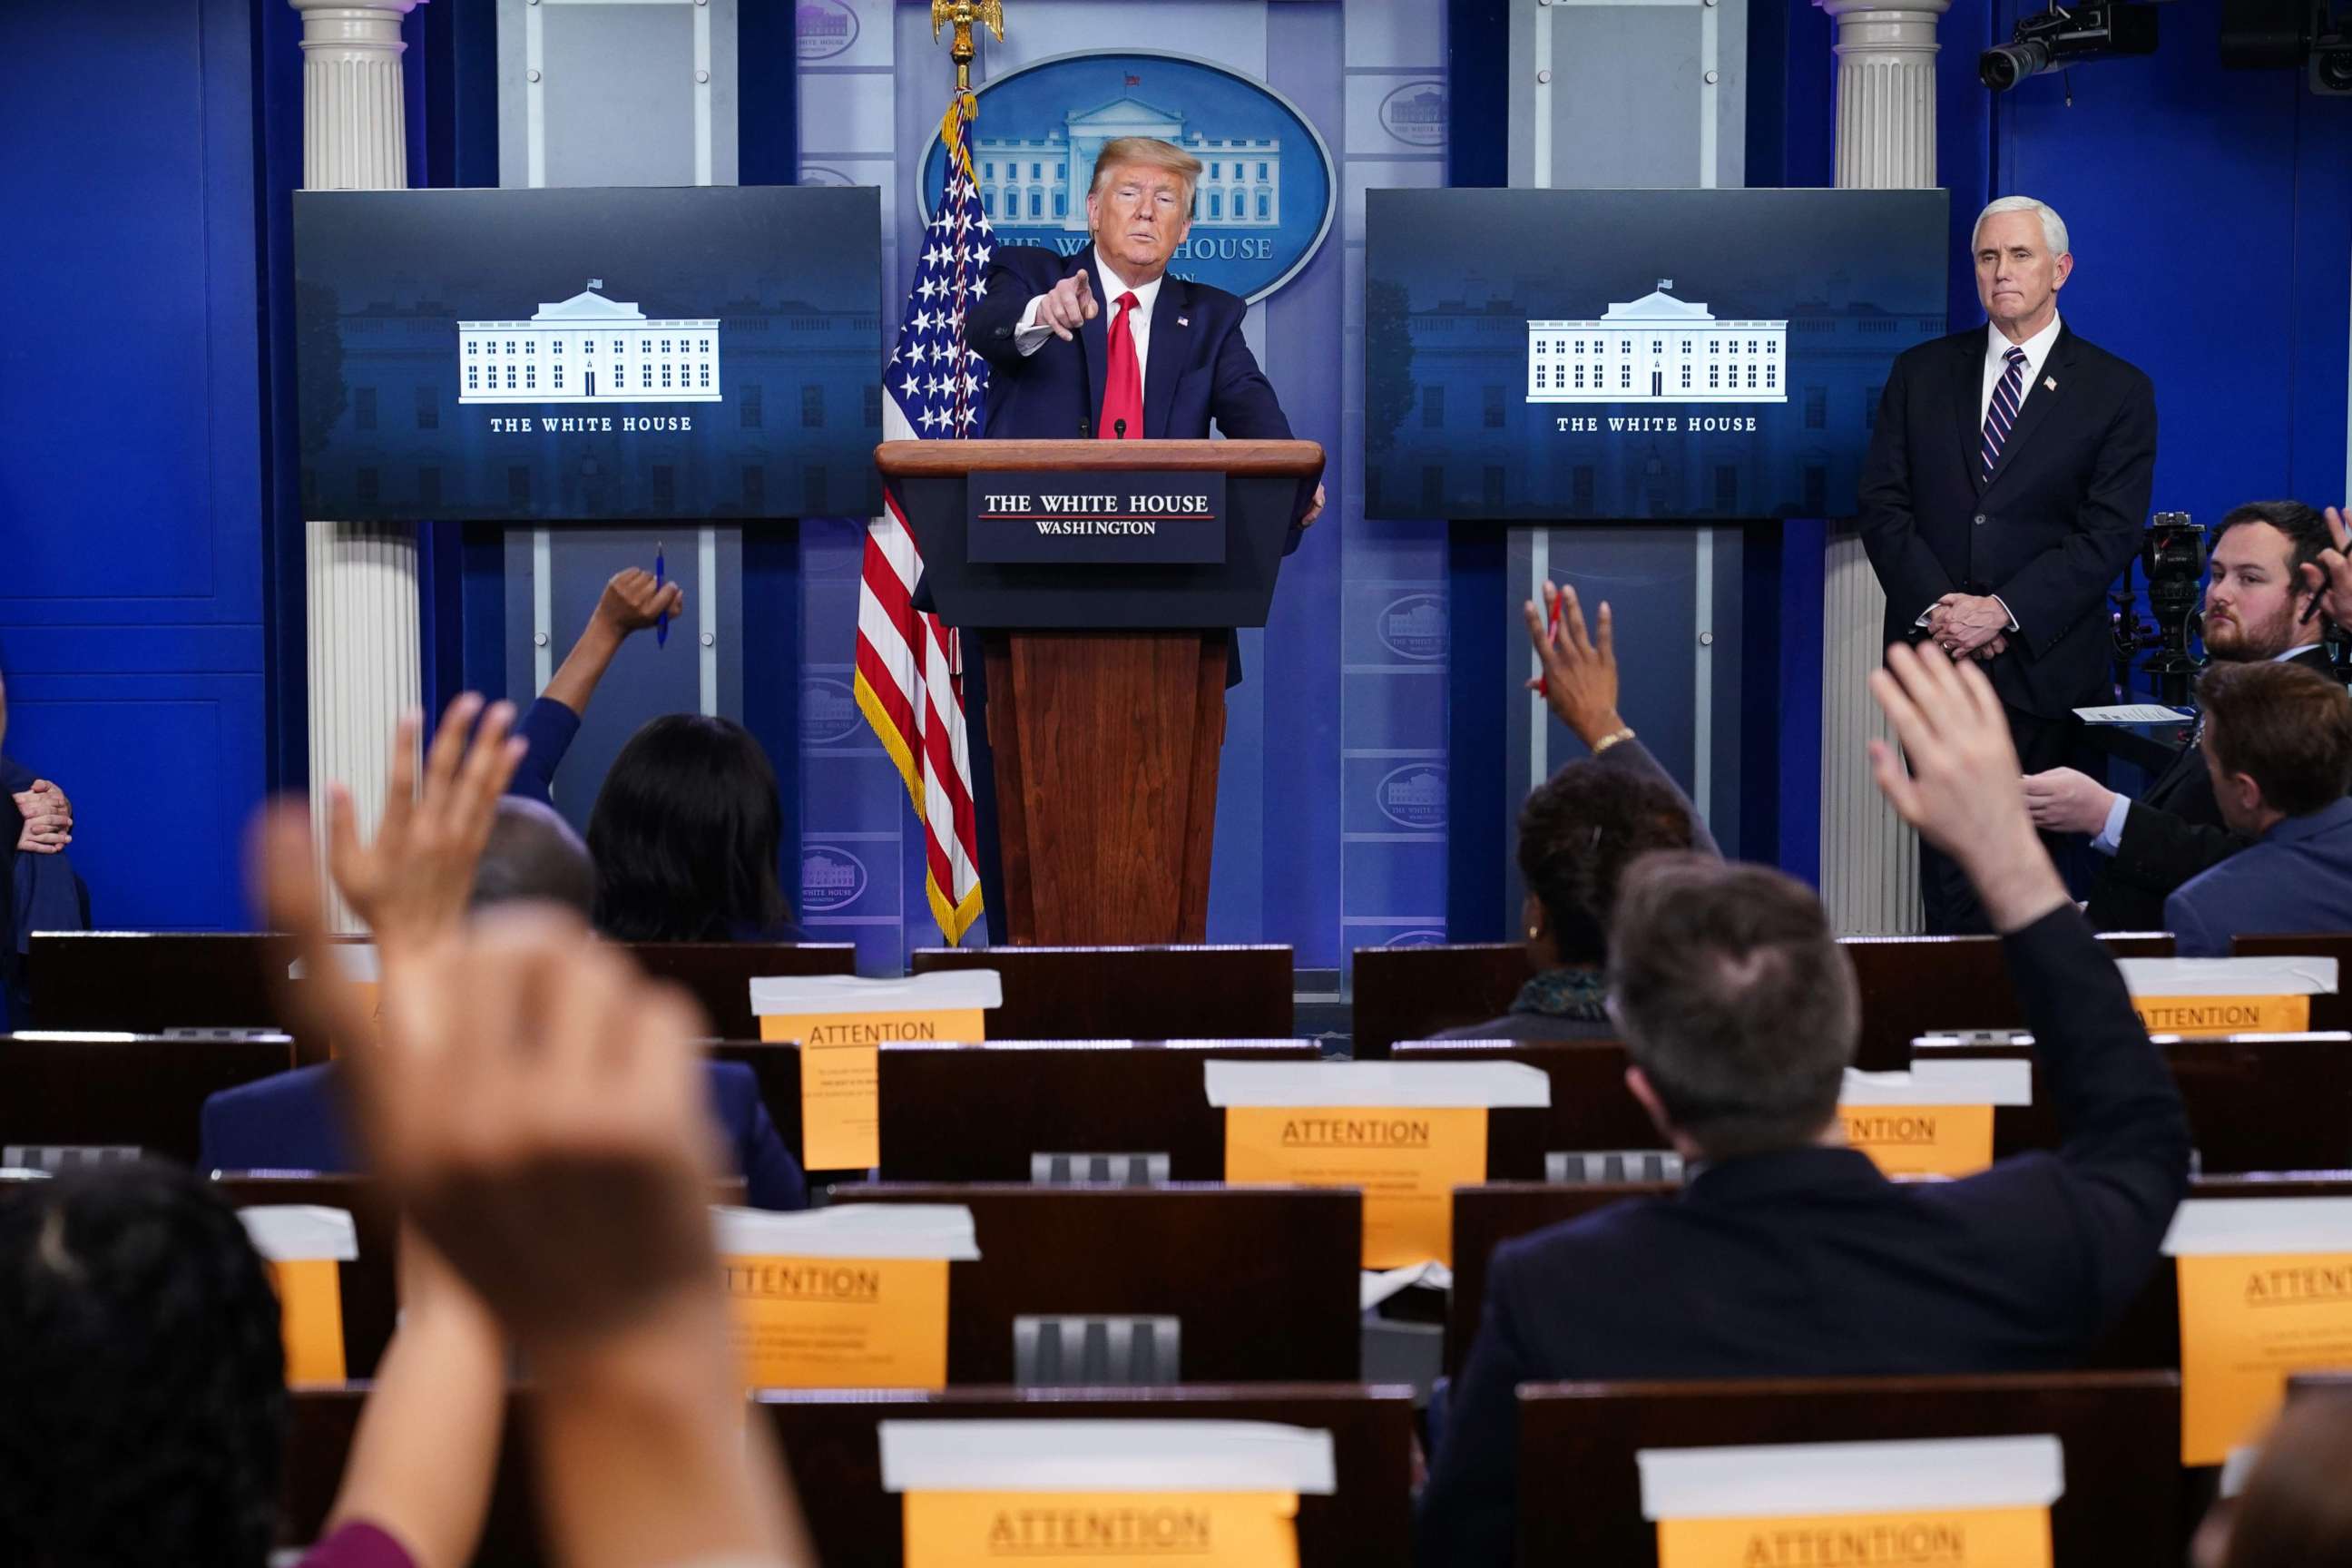 PHOTO: President Donald Trump speaks during the daily briefing on the novel coronavirus, COVID-19, in the White House on April 8, 2020, in Washington.